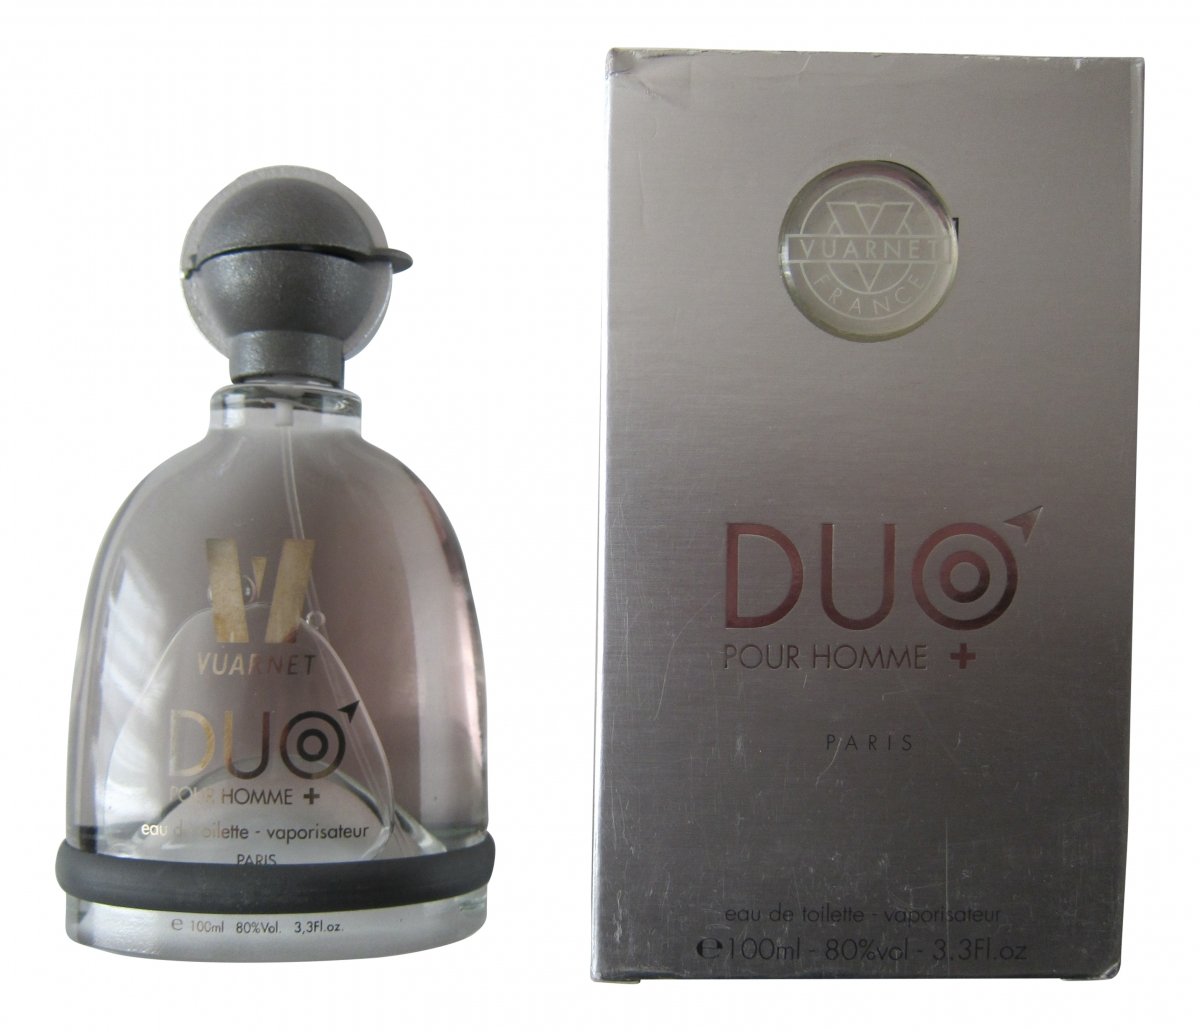 Duo pour Homme by Vuarnet » Reviews & Perfume Facts